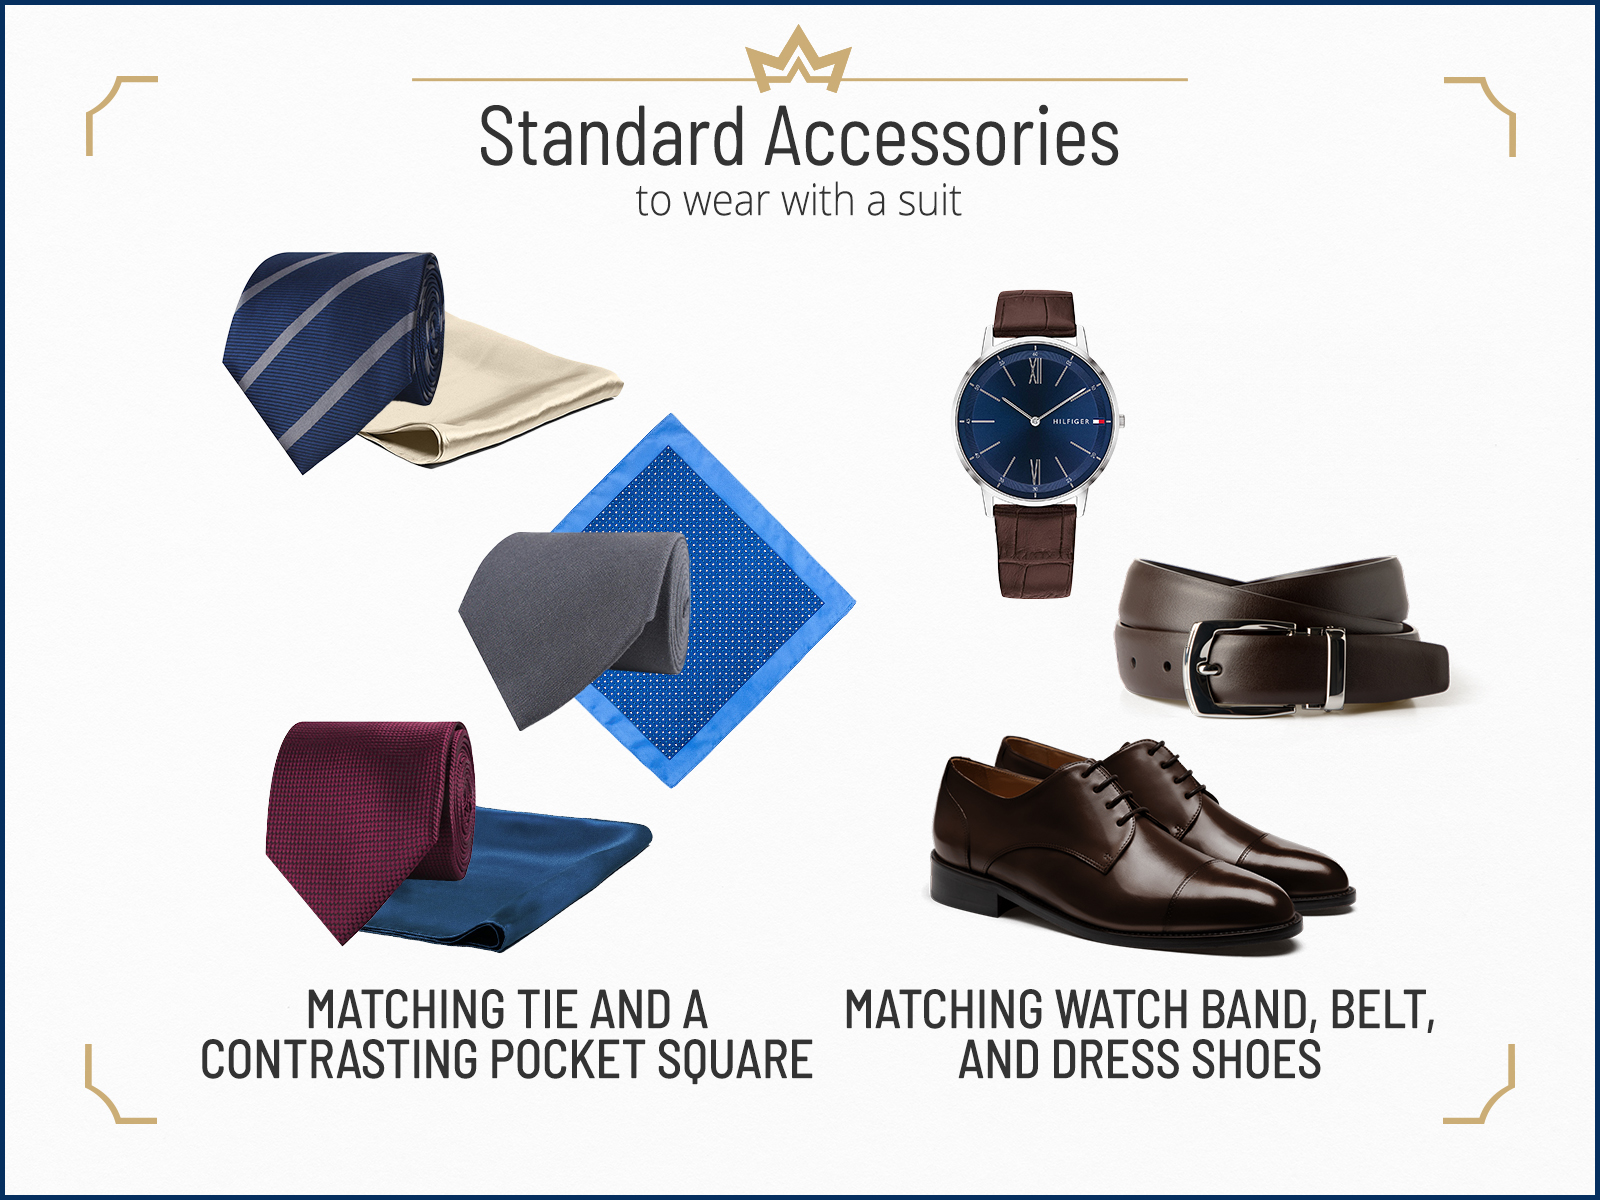 Standard accessories you can wear with a suit